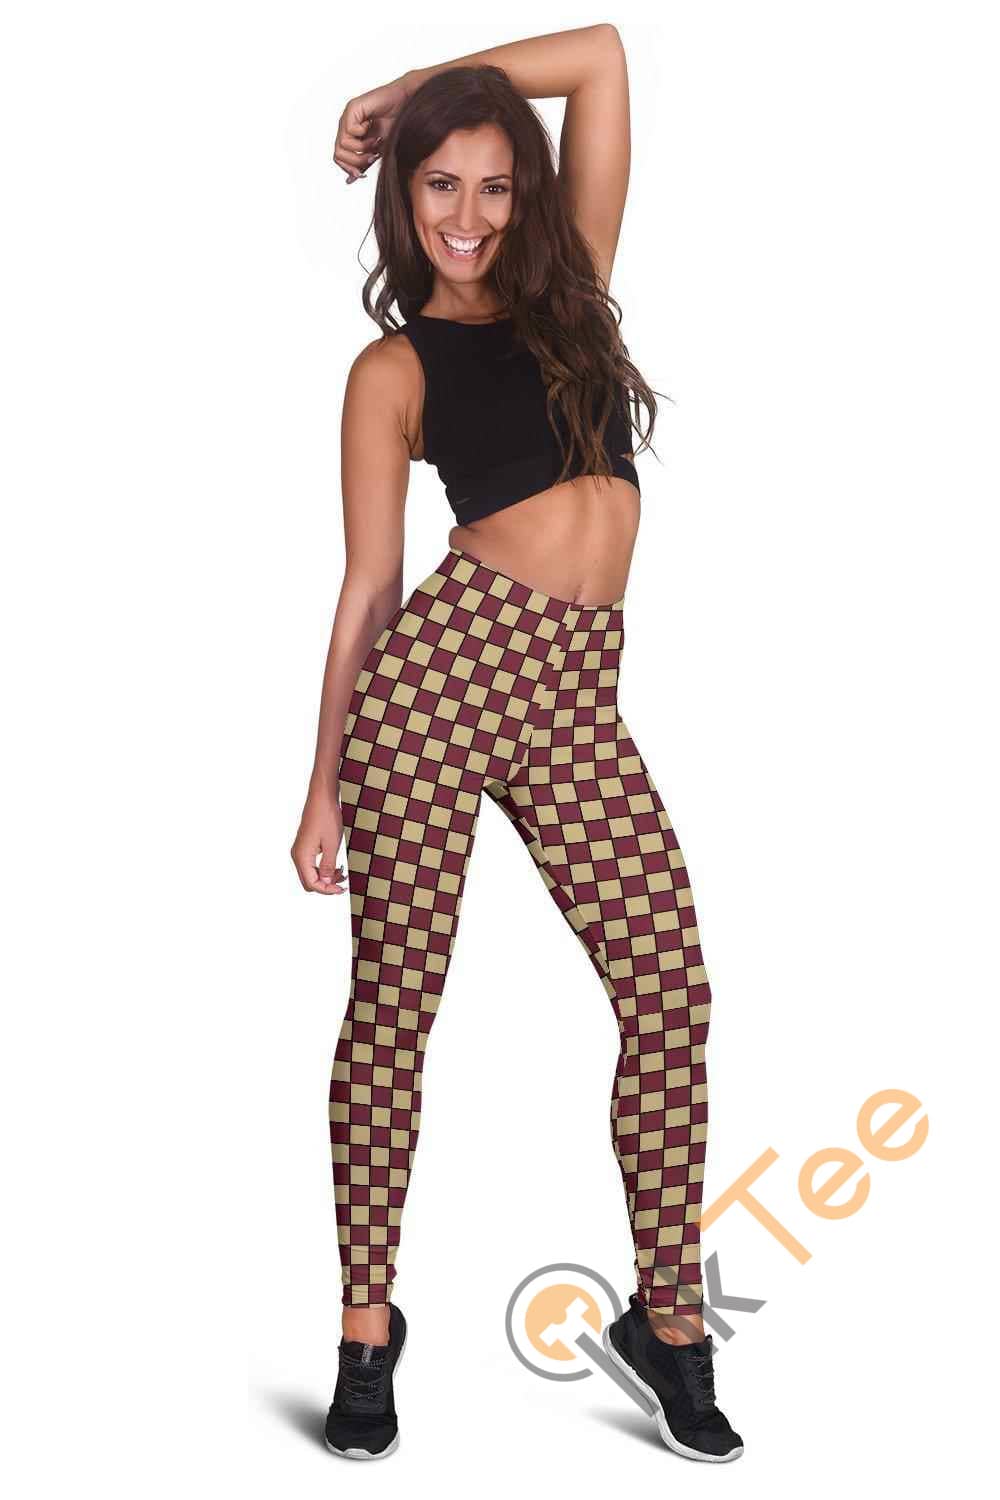 Inktee Store - Florida State Seminoles Fan Inspired 3D All Over Print For Yoga Fitness Checkers Women'S Leggings Image